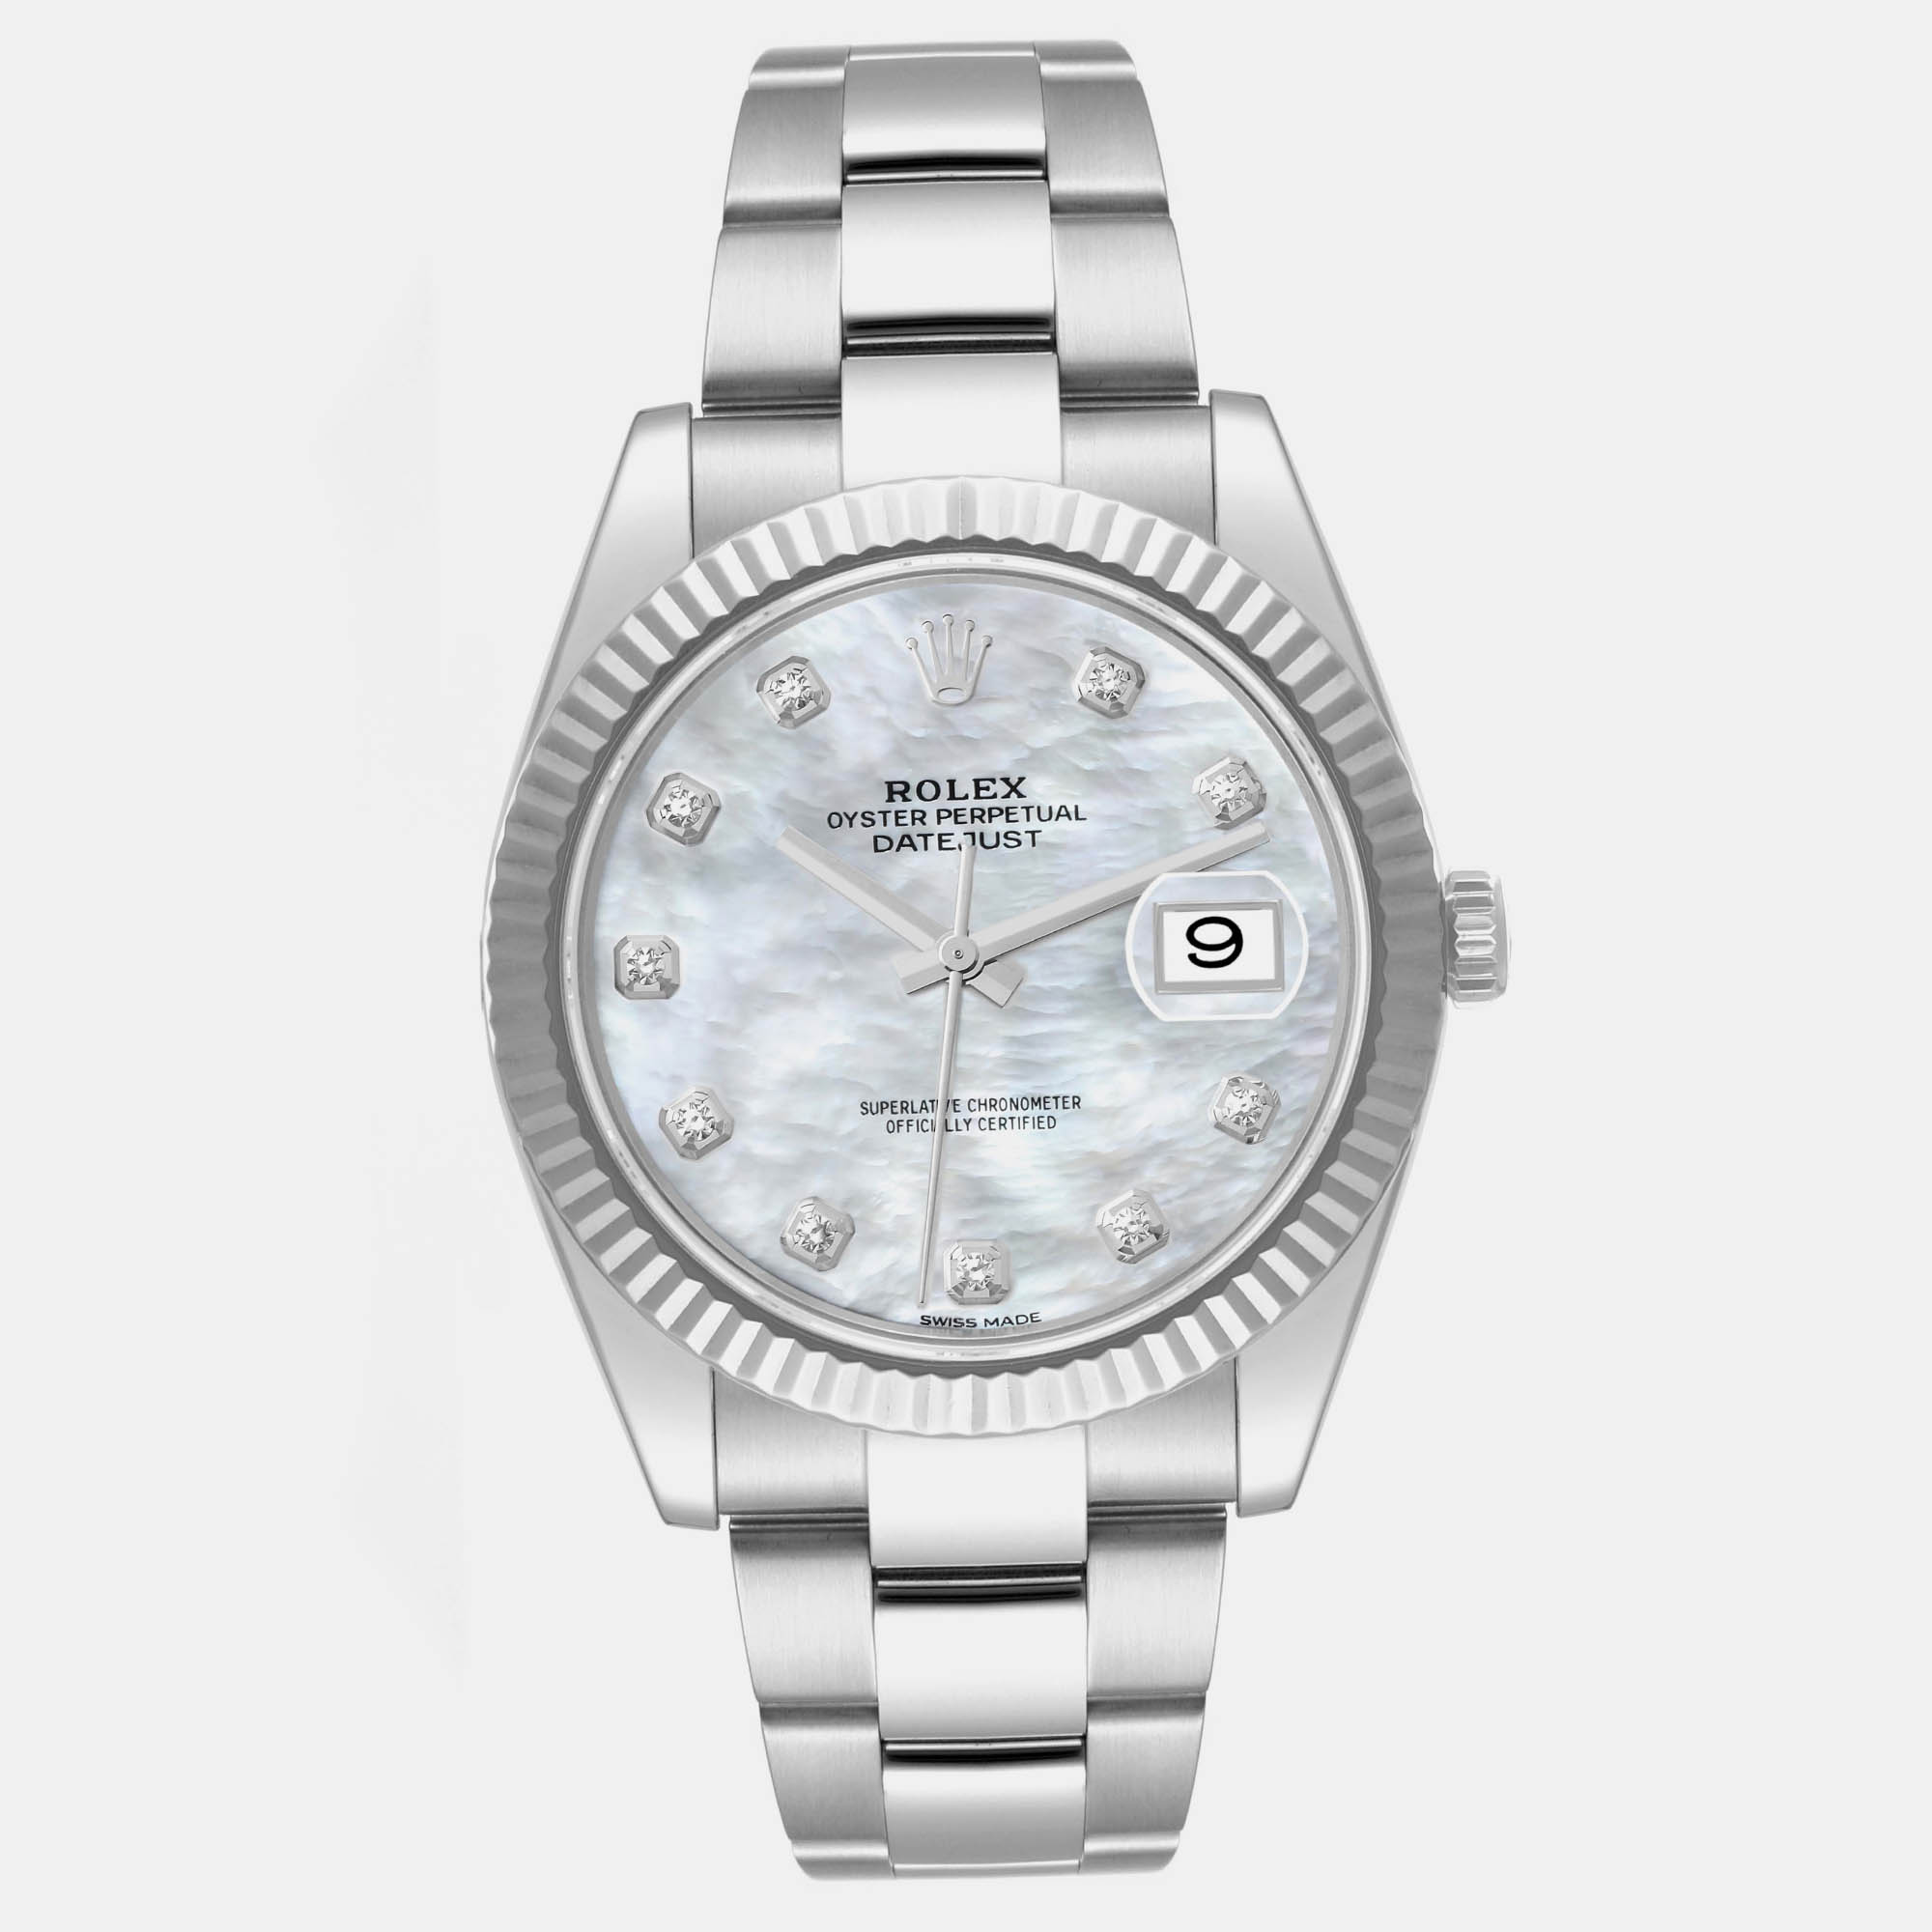 Rolex Datejust Steel White Gold Mother Of Pearl Diamond Dial Men's Watch 126334 41 Mm